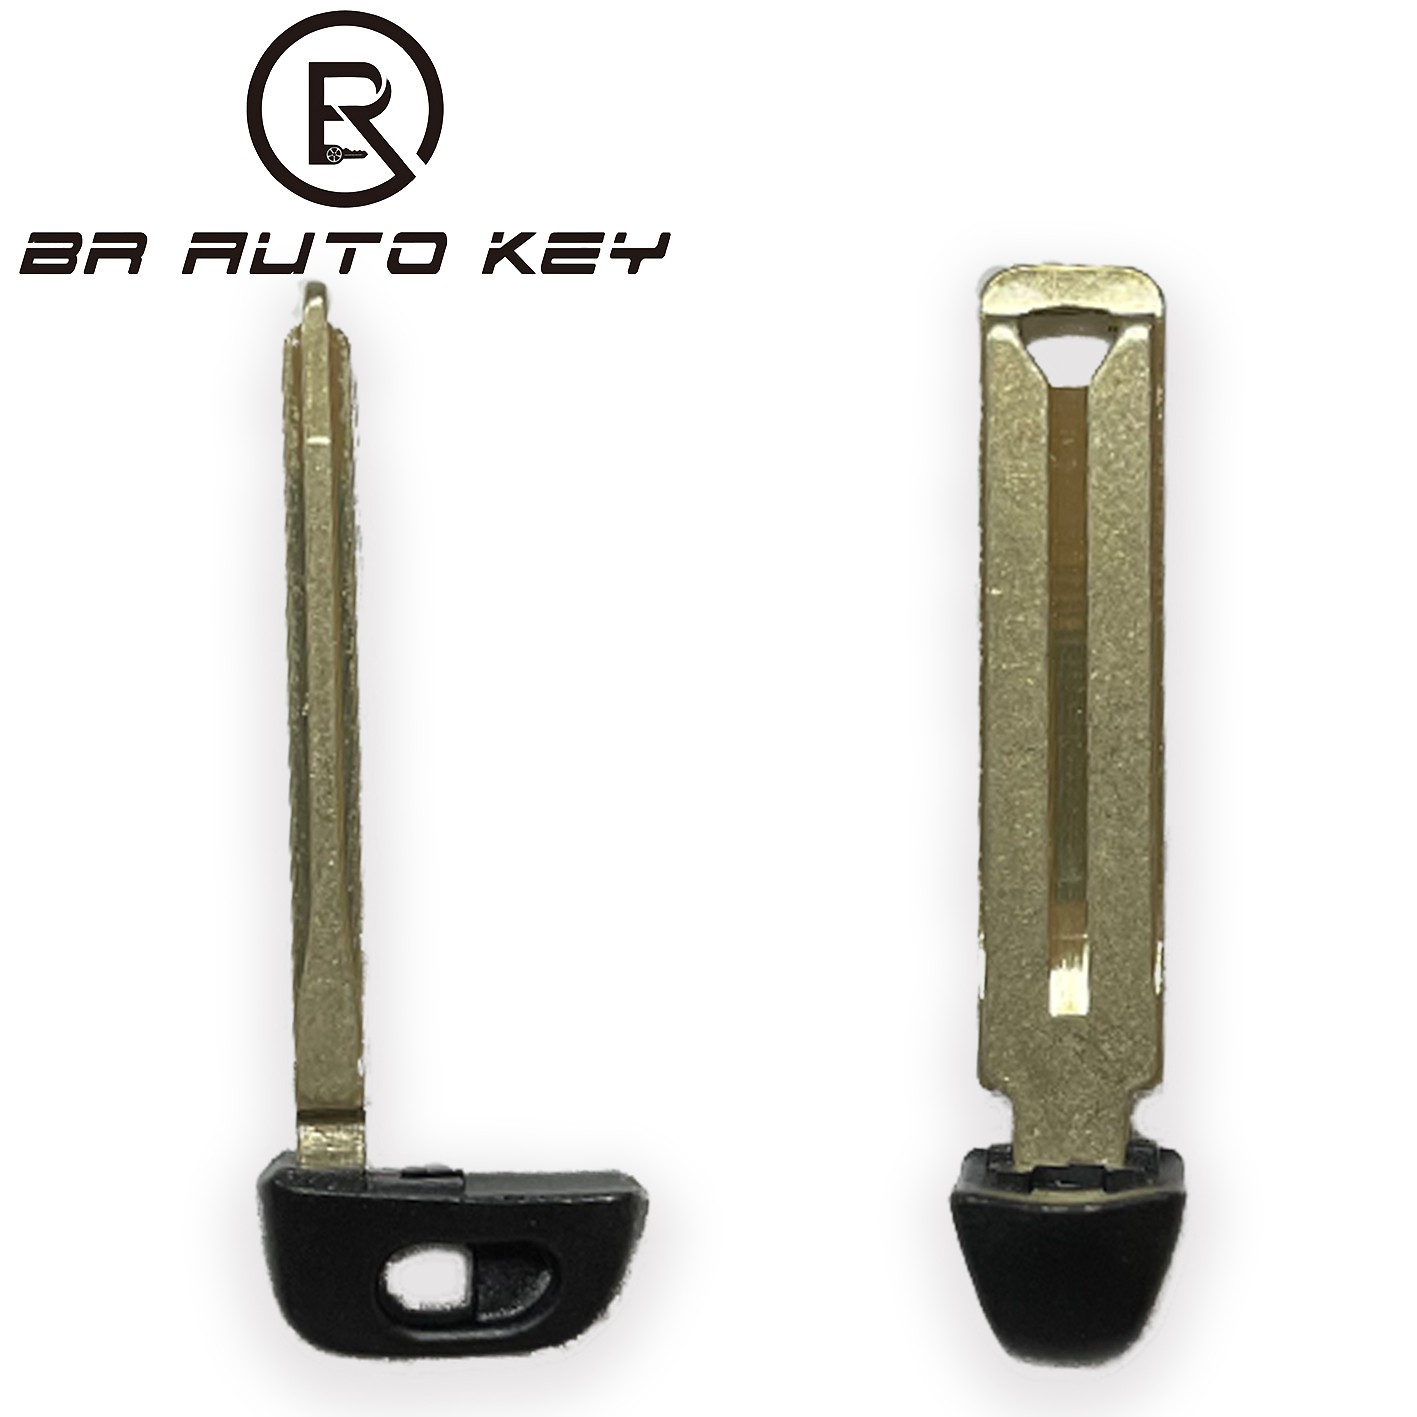 Smart Remote Proximity Entry Key For Toyota Avensis Prius 2010-2013 2 Buttons 434MHz ID4D 61A449-0011 P/N:89904-0F010